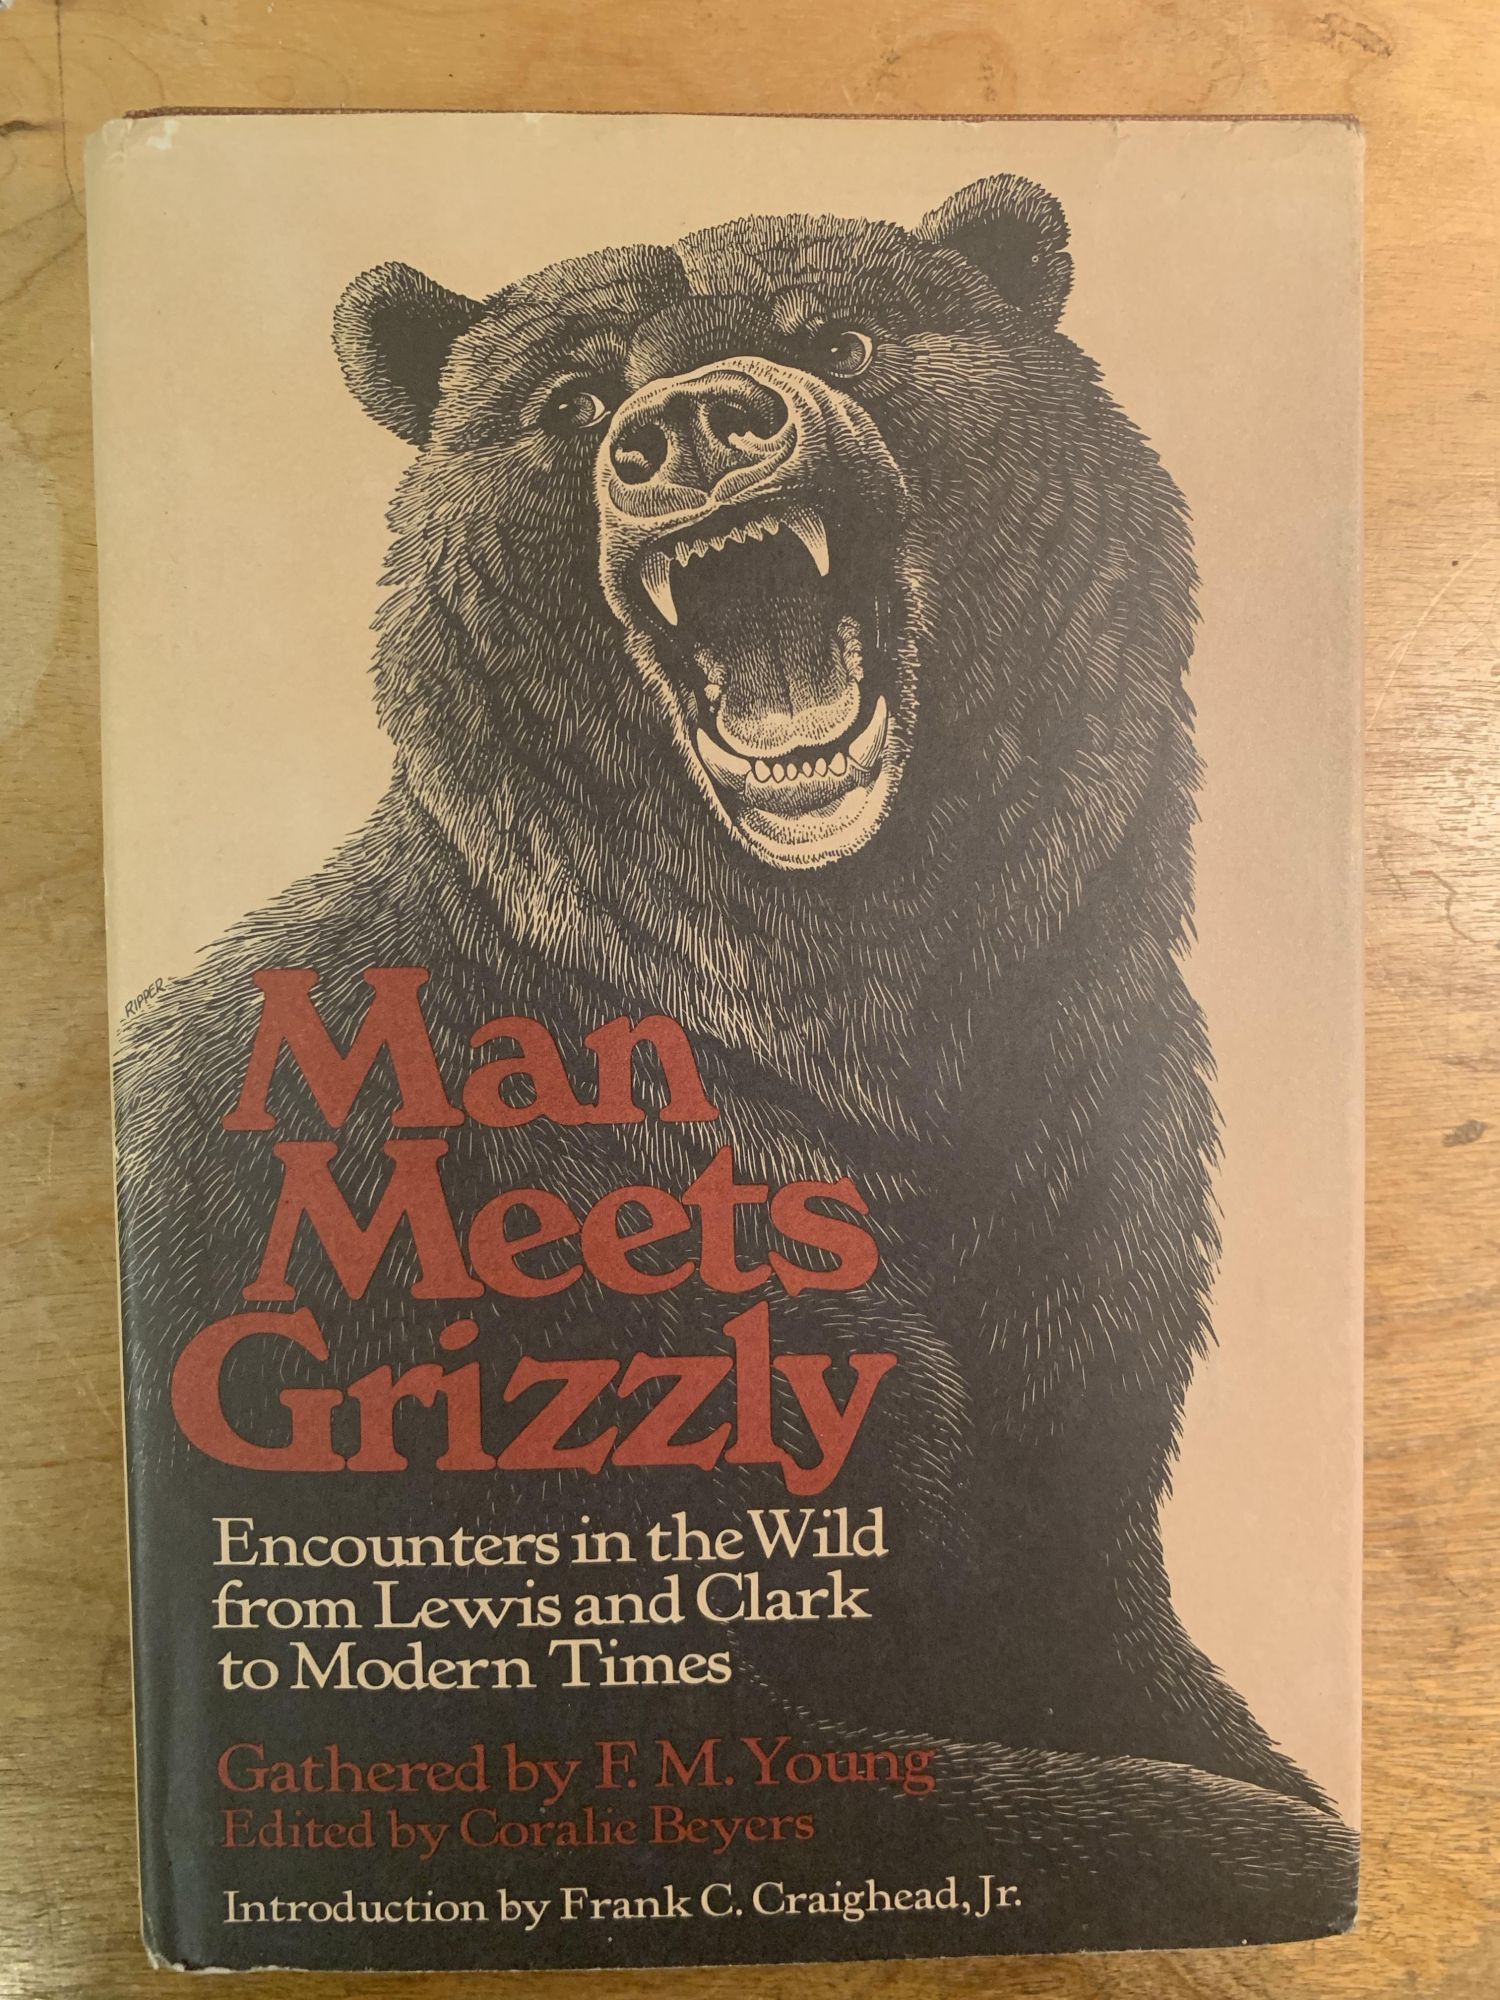 Young, F.M. and Coralie Beyers (Editors) - Man Meets Grizzly : Encounters in the Wild from Lewis and Clark to Modern Times; (Foreword by Frank C. Craighead, Jr. )